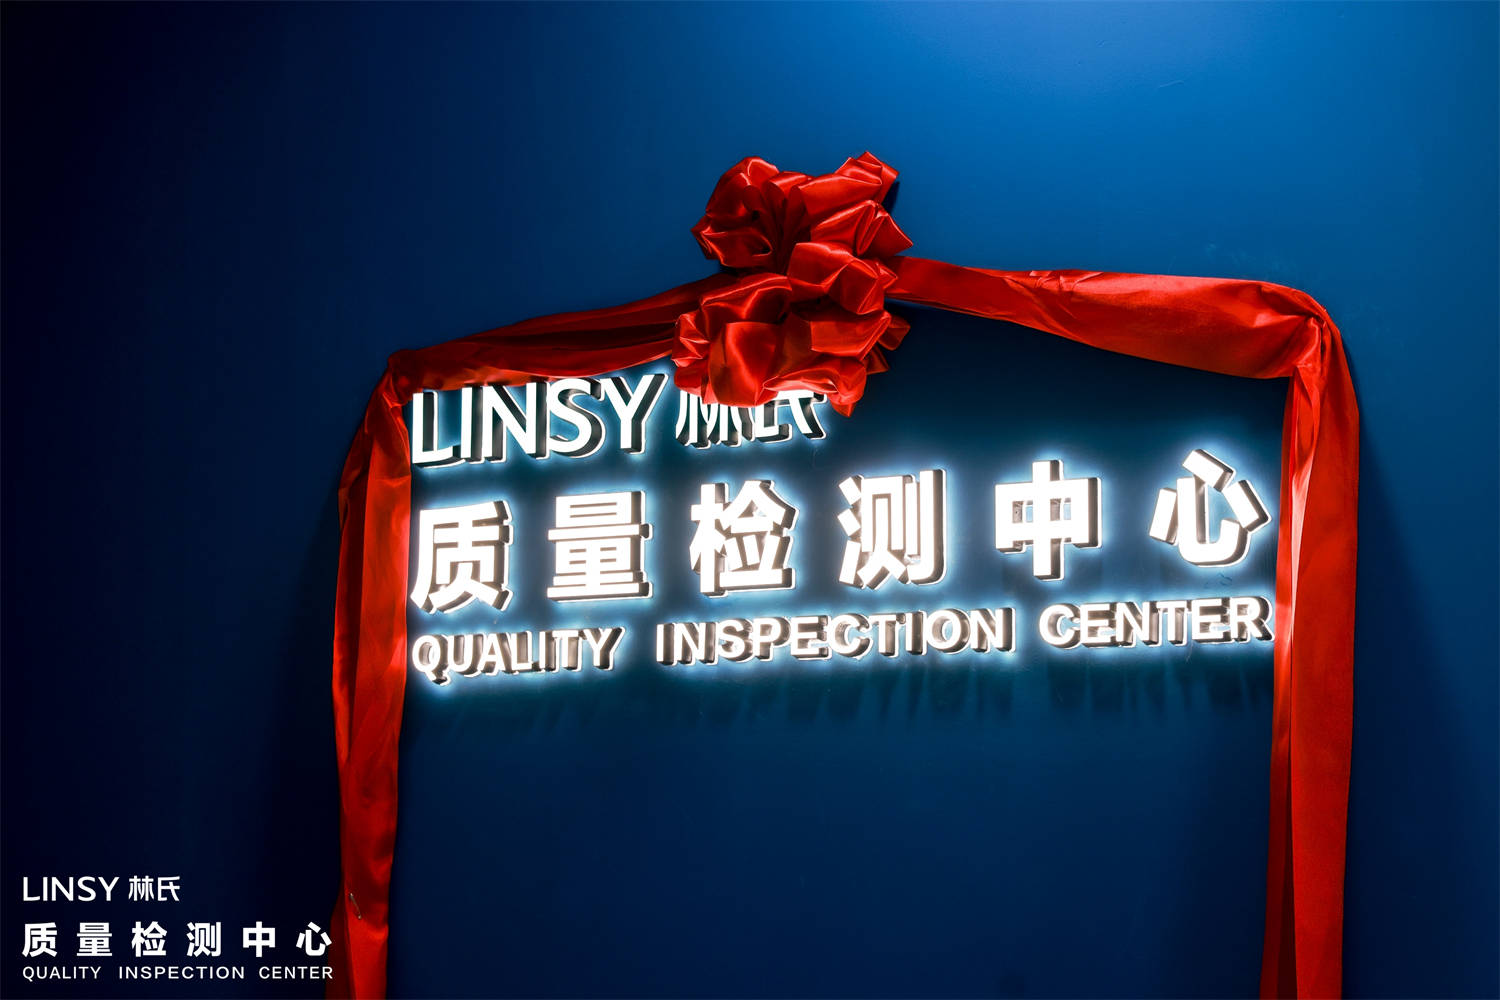 Congratulations on the LINSY's Quality Inspection Center Opening